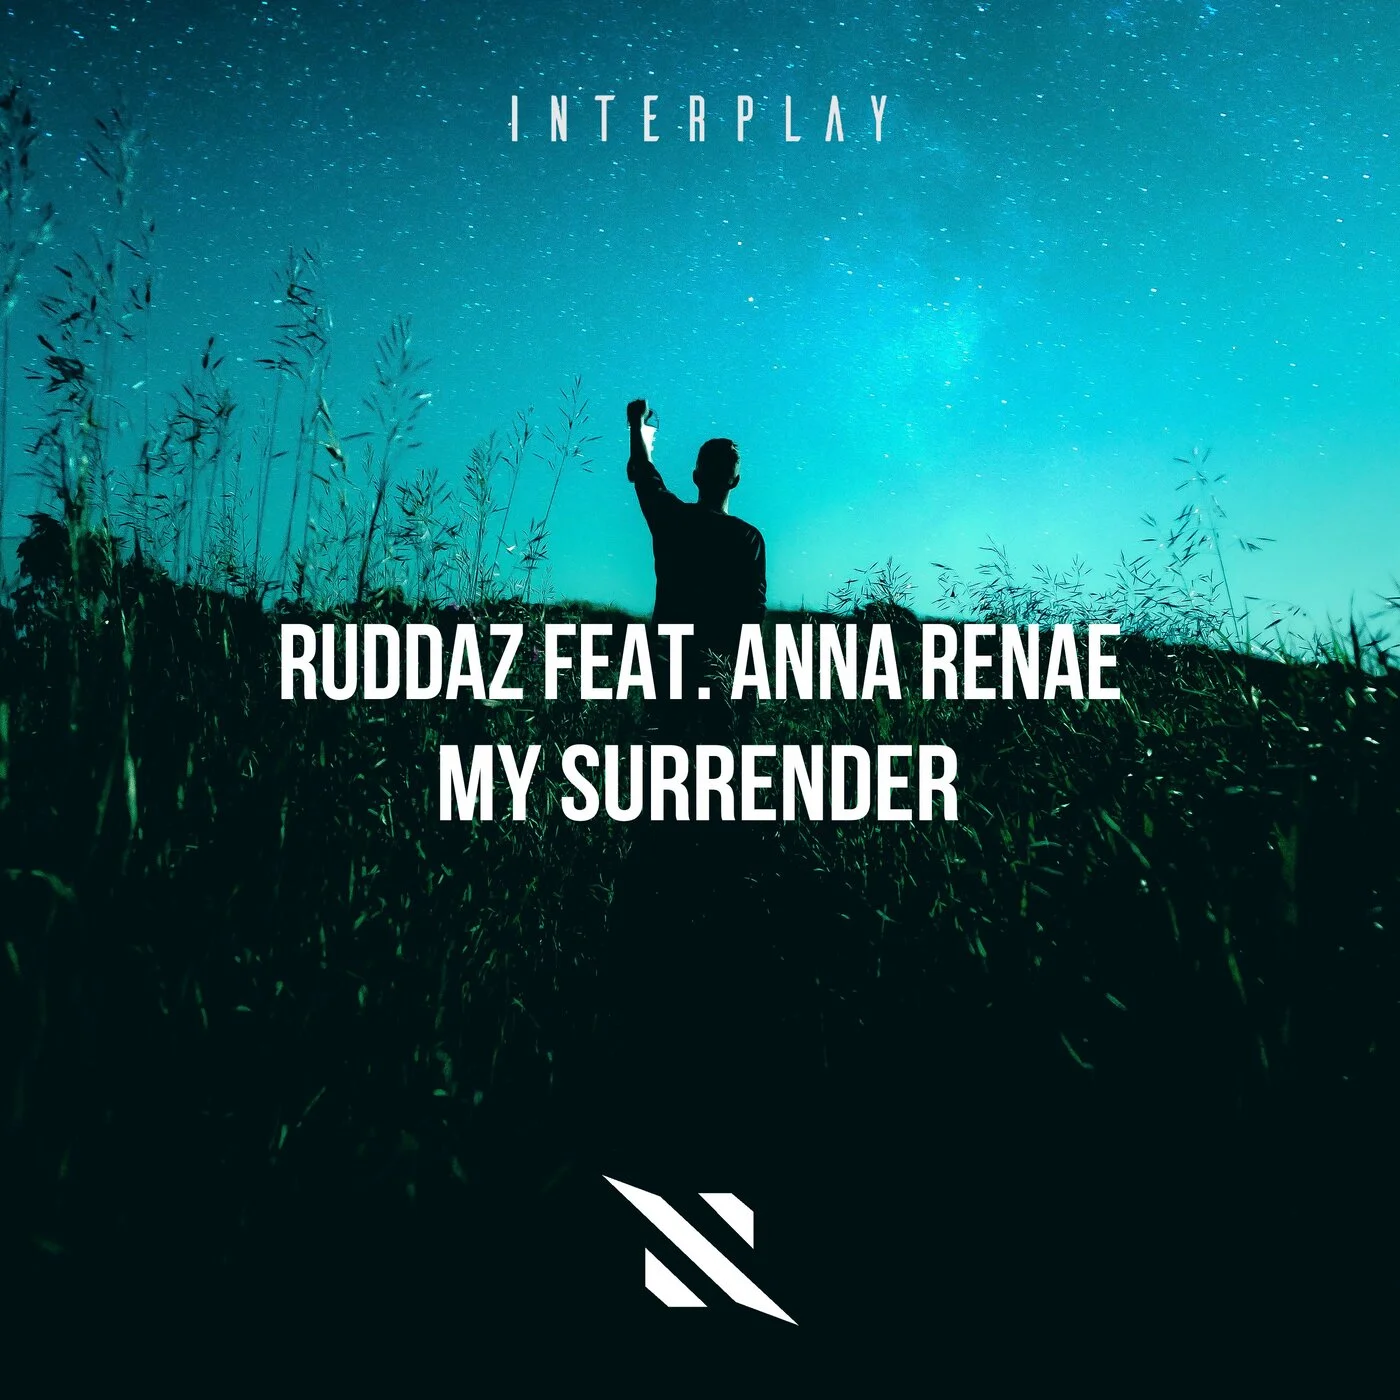 Ruddaz Feat. Anna Renae - My Surrender (Extended Mix)